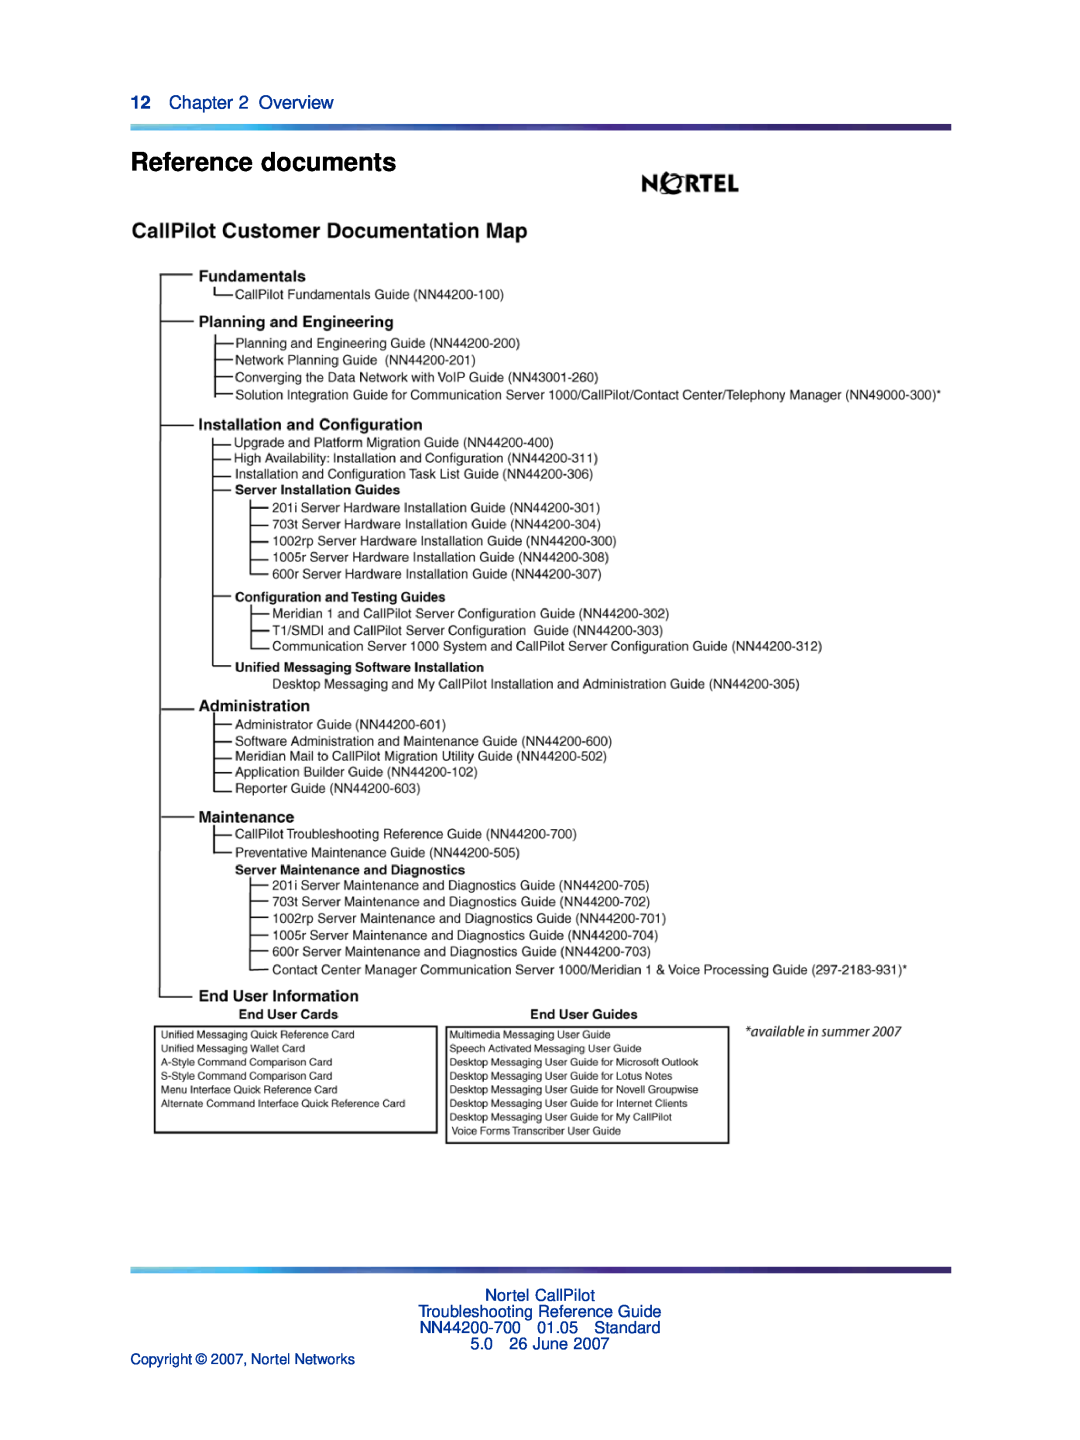 Nortel Networks NN44200-700 manual Reference documents, Overview, Nortel CallPilot Troubleshooting Reference Guide 